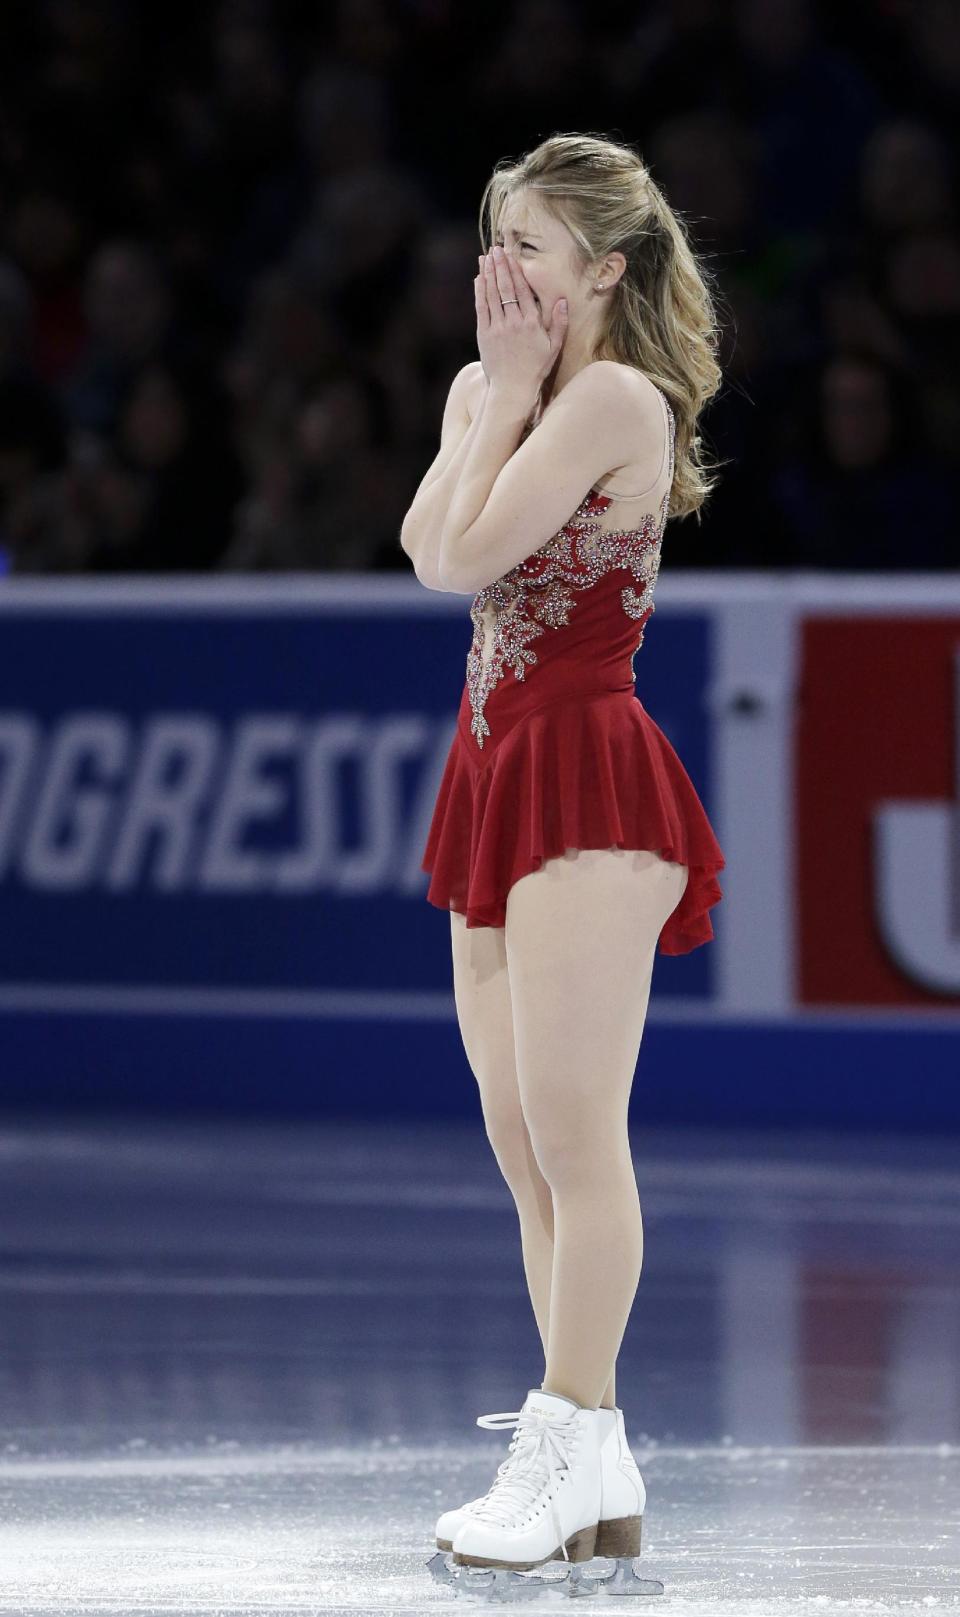 Ashley Wagner becomes emotional at mid-ice after her performance during the skating spectacular after the U.S. Figure Skating Championships in Boston, Sunday, Jan. 12, 2014. Women's third finisher Mirai Nagasu, the only one of the top four finishers with Olympic experience, was bumped in favor of Wagner when U.S. Figure Skating announced the selections earlier Sunday. (AP Photo/Steven Senne)